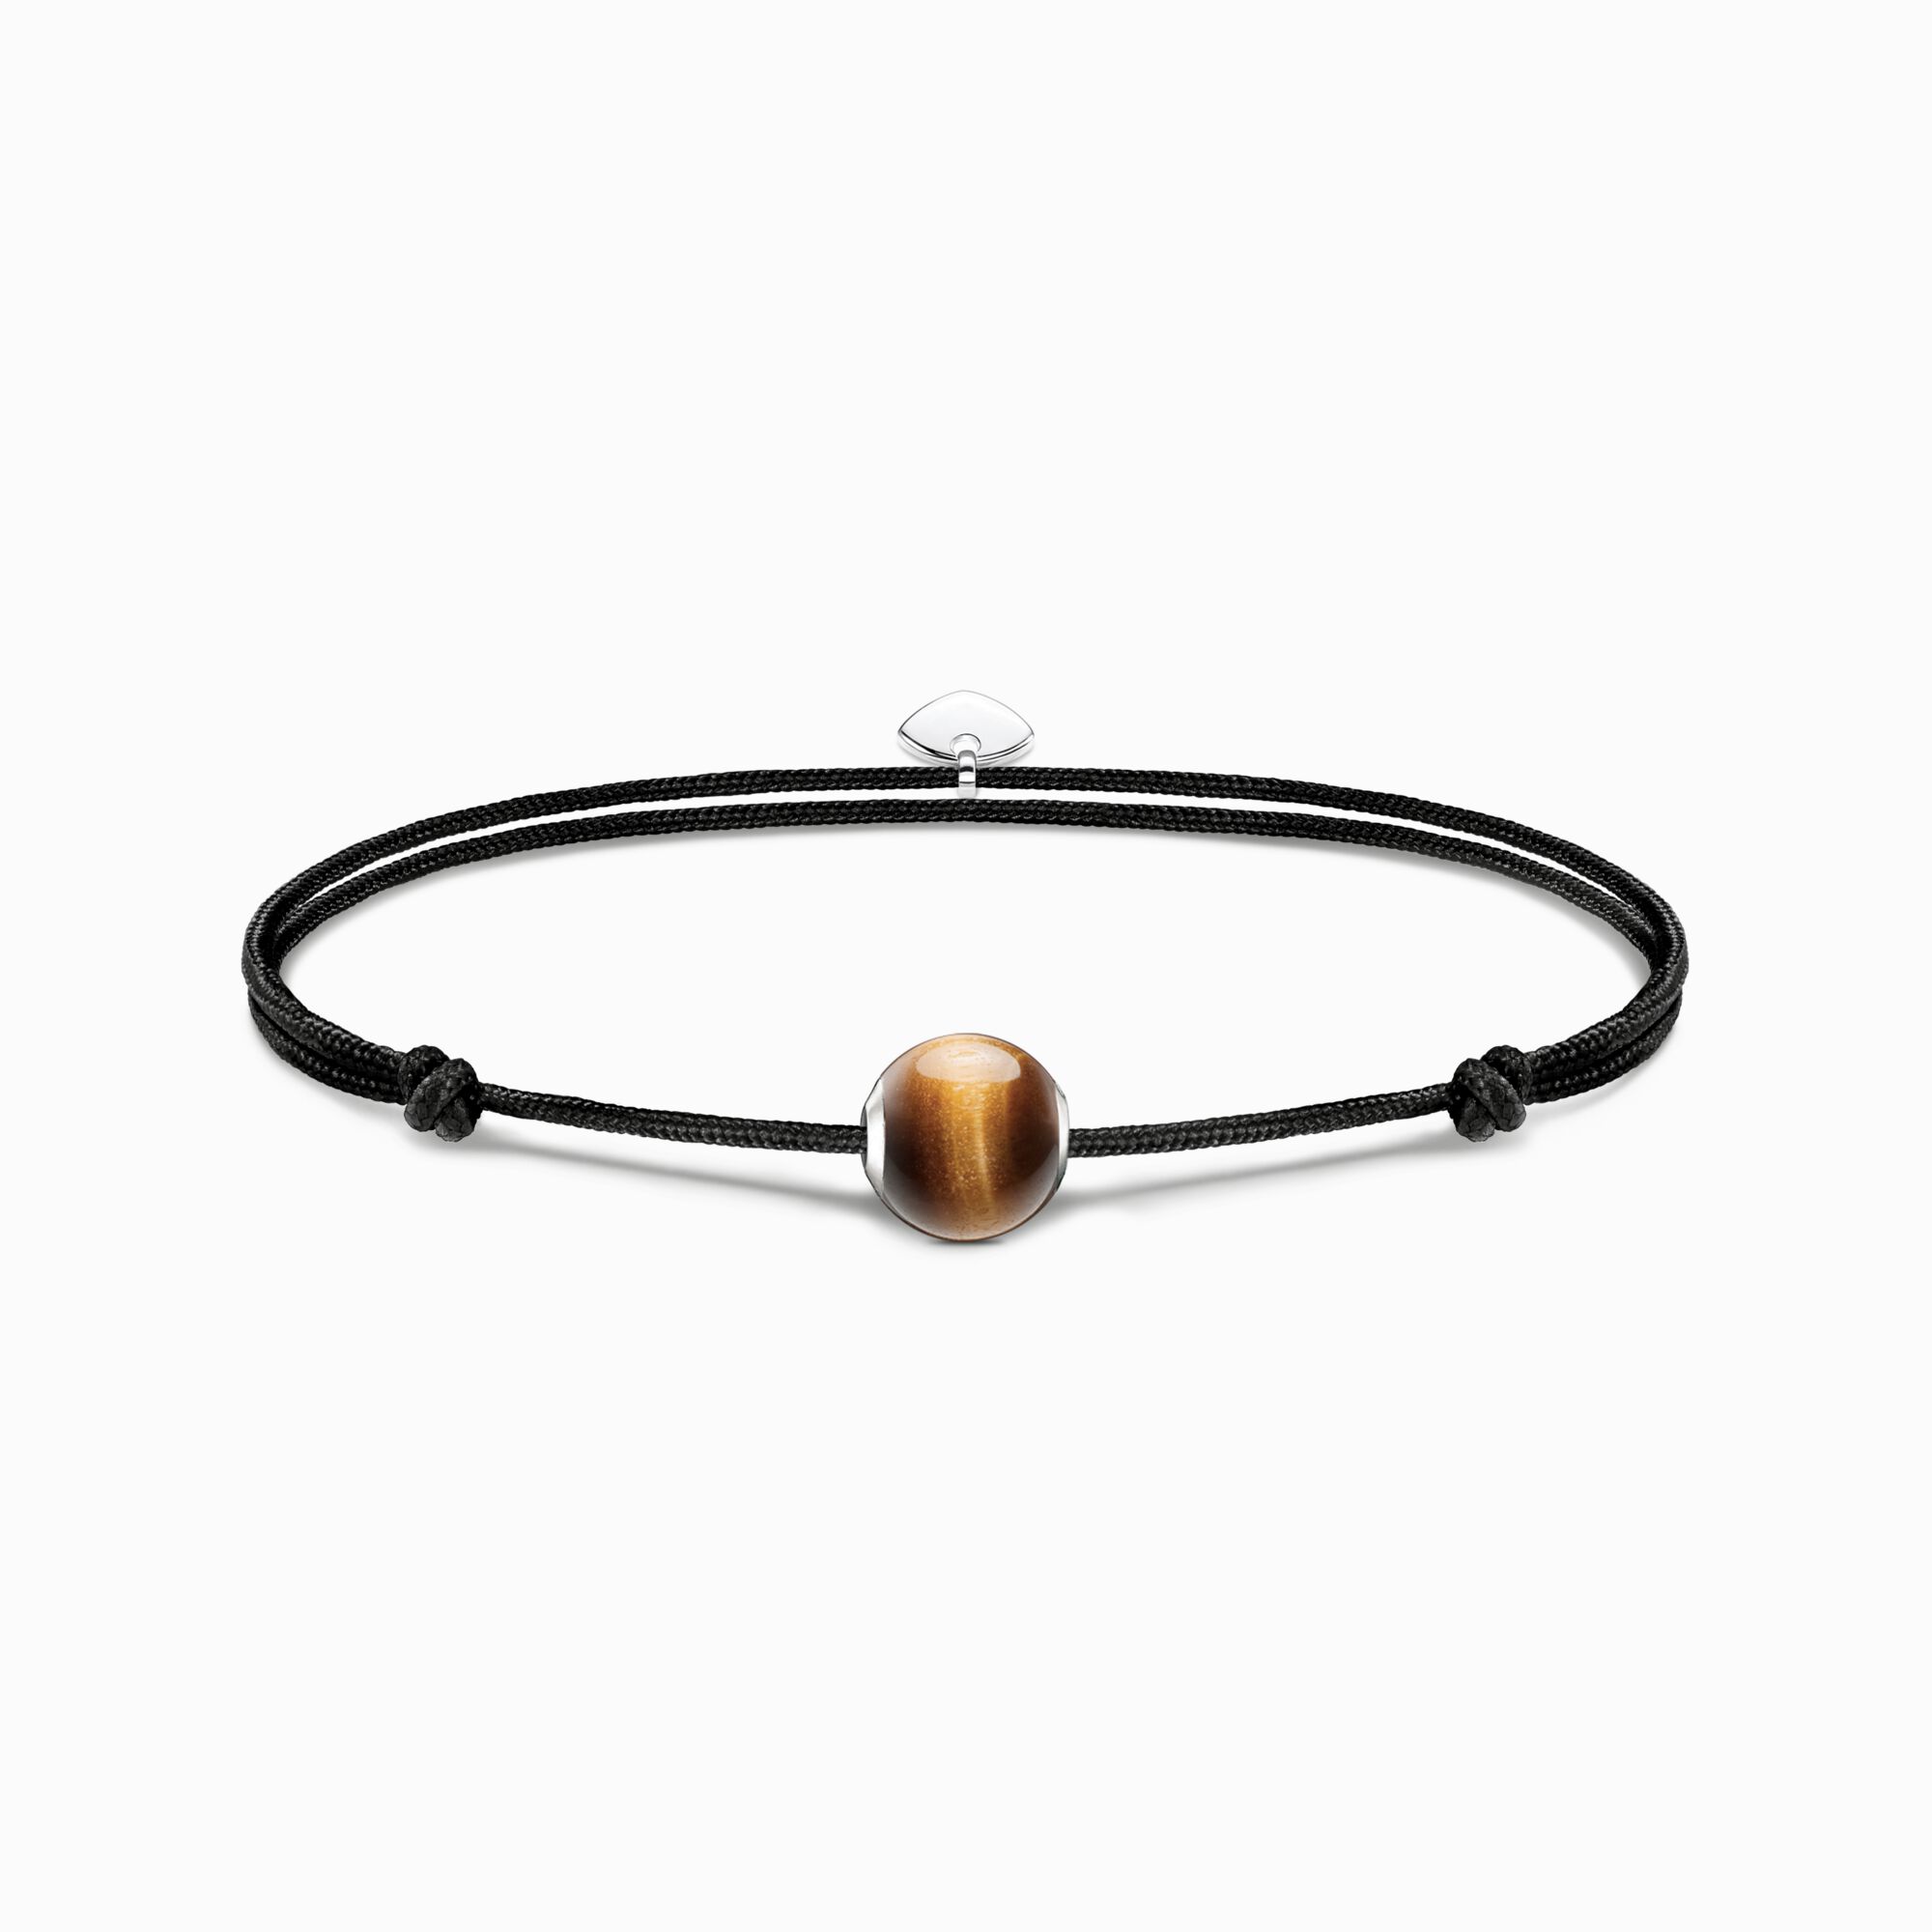 Bracelet Karma Secret with brown tiger&#39;s eye Bead from the Karma Beads collection in the THOMAS SABO online store